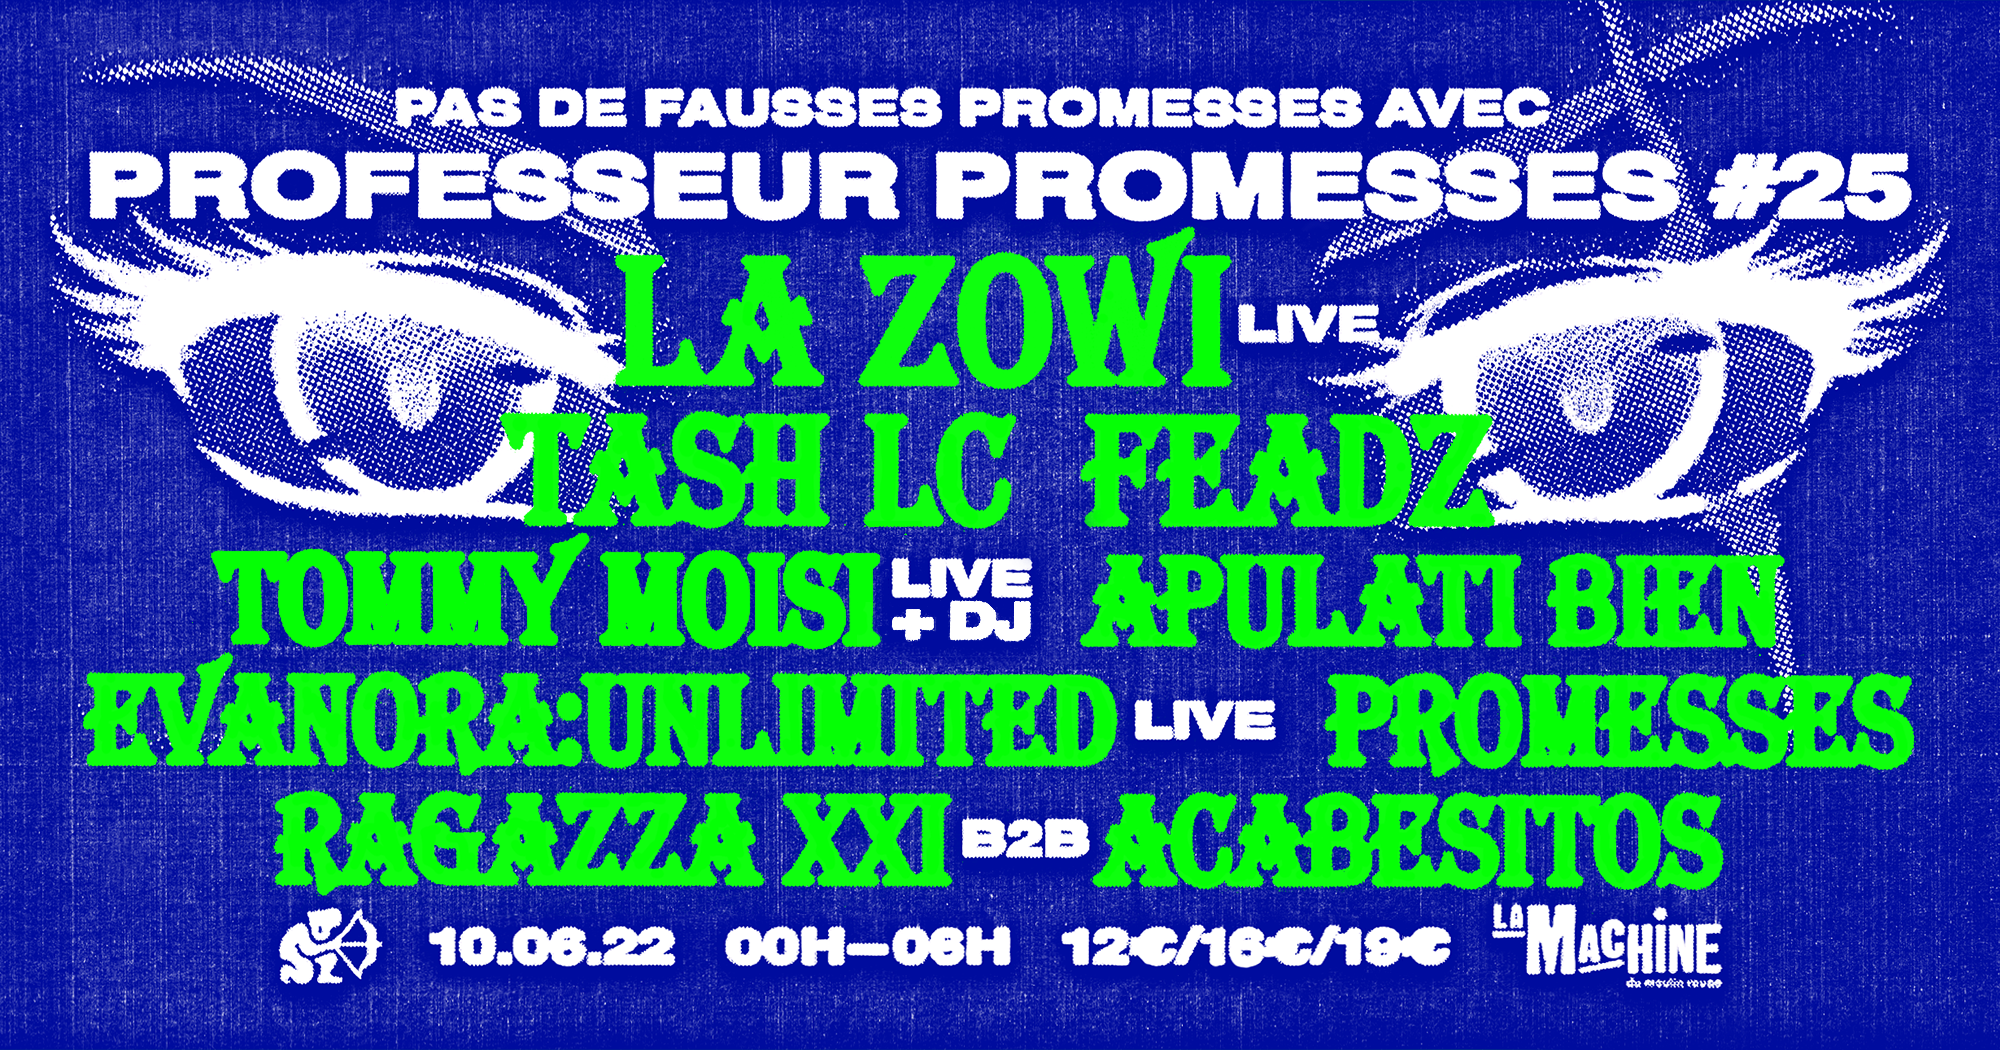 Professeur Promesses #25 with La Zowi, Tash LC, Feadz, Evanora:Unlimited, tommy moisi - Página frontal